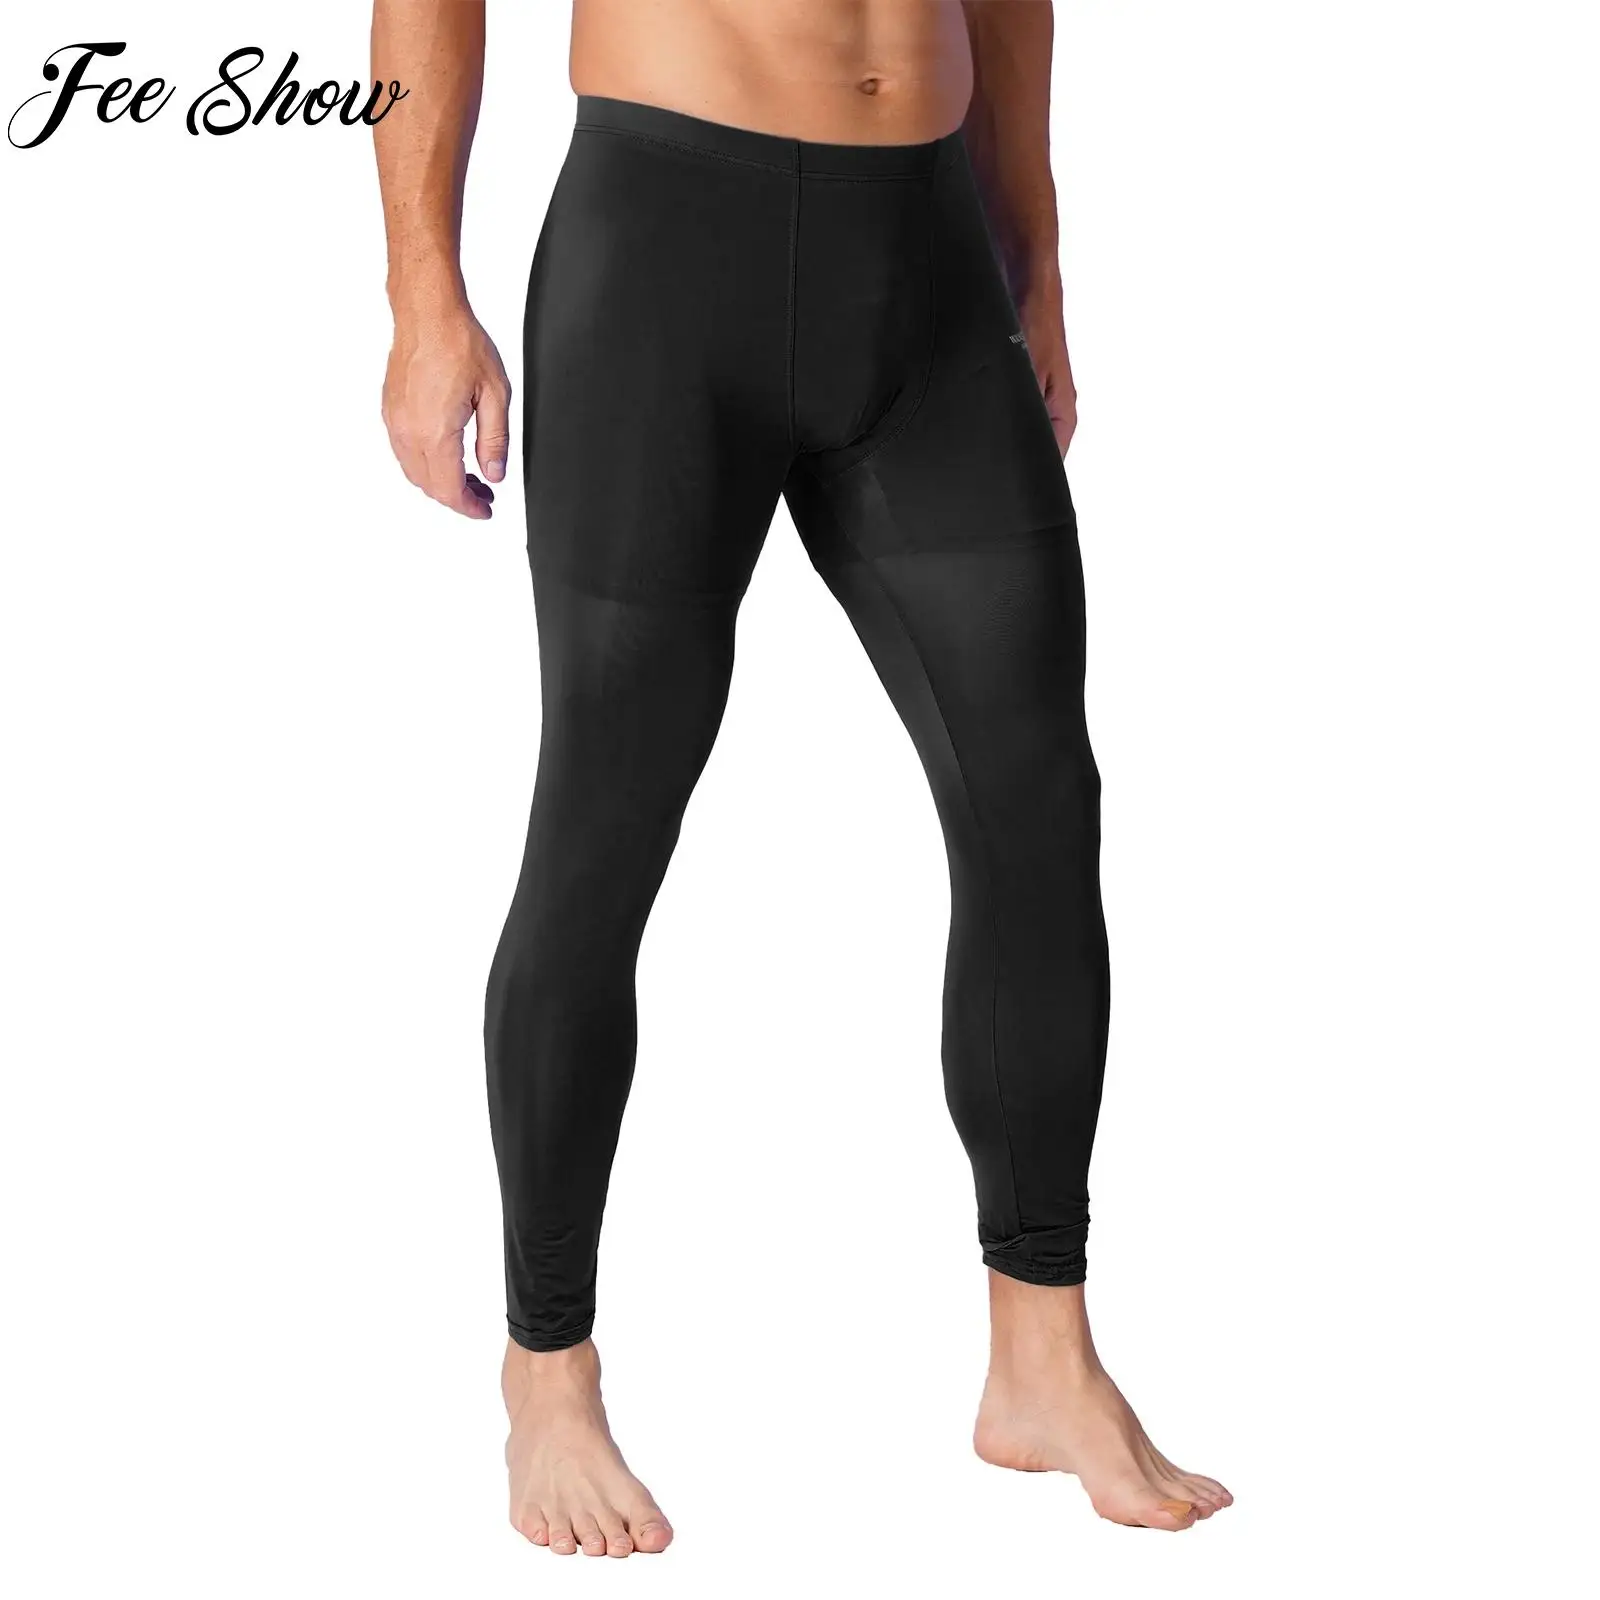 Mens-Athletic-Yoga-Pants-Leggings-Solid-Color-Stretchy-Workout-Bottoms ...